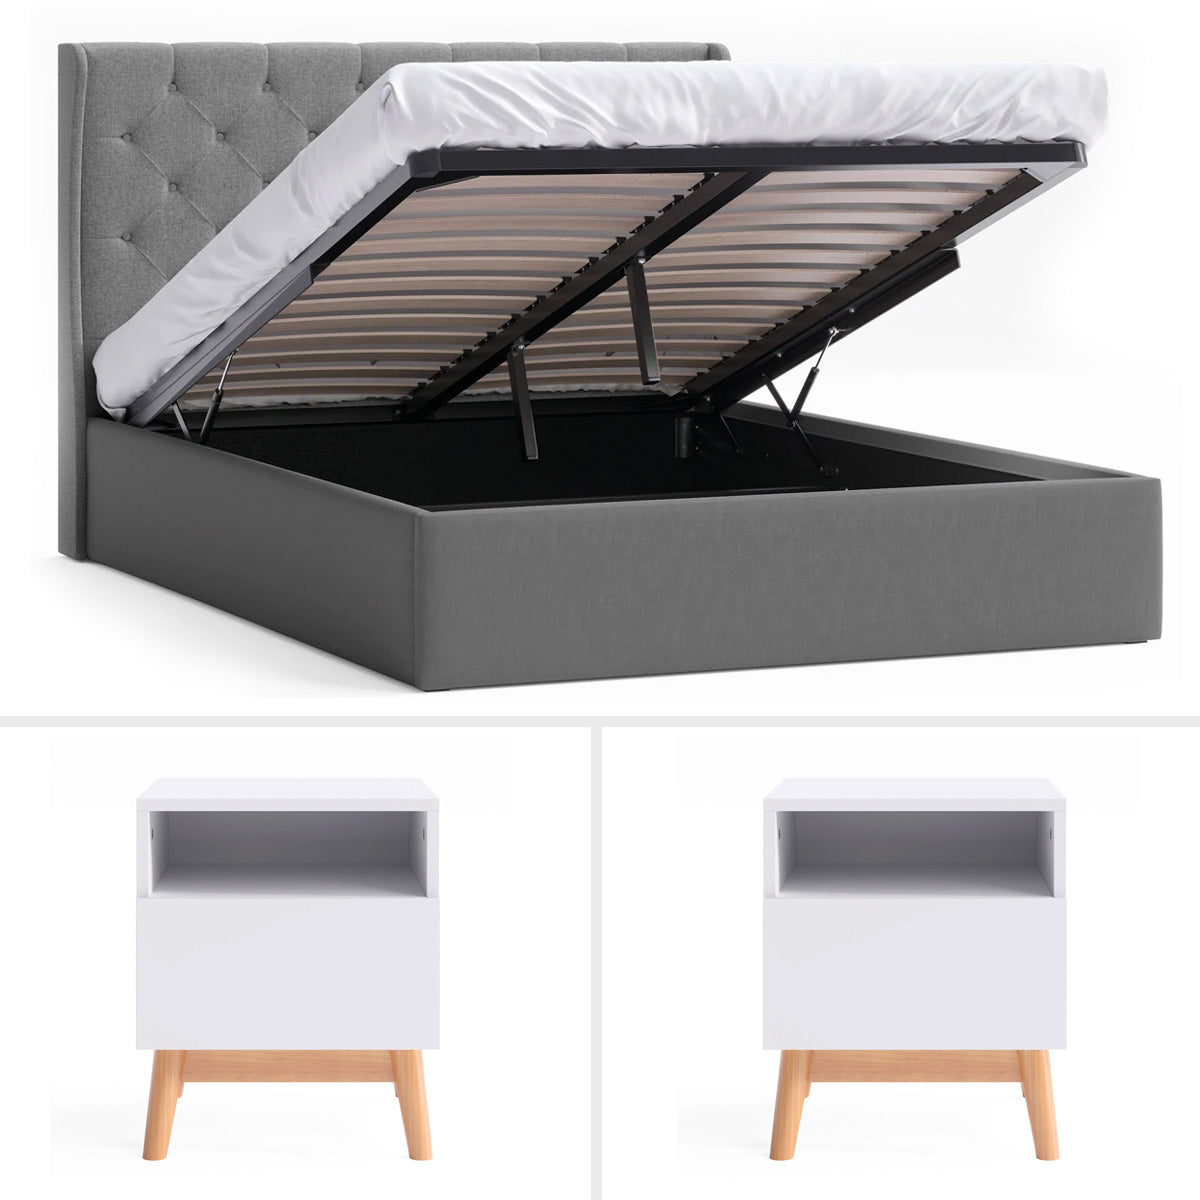 Charcoal Stella Gas Lift Storage Bed Frame with Aspen Bedside Tables Package